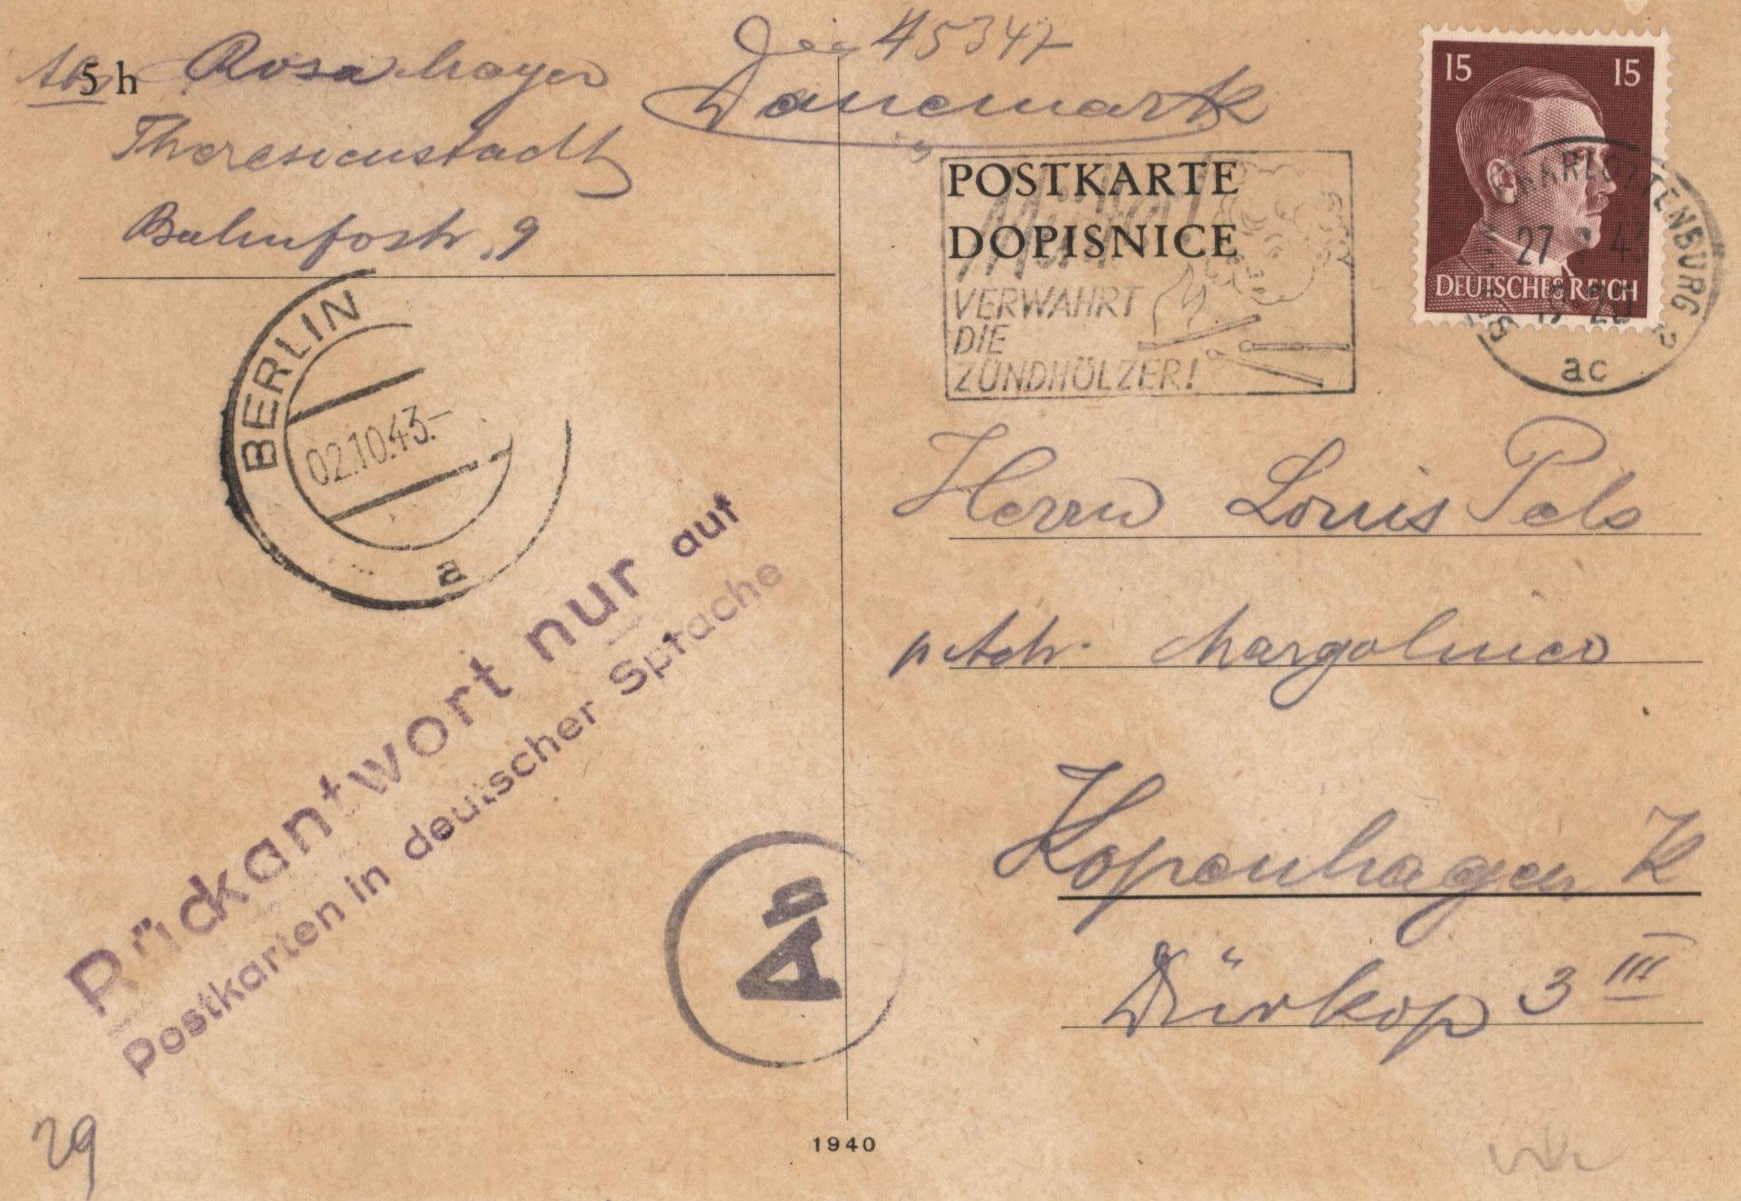 A postcard from Rosa and Ascher Mayer sent from Theresienstadt in August 1943